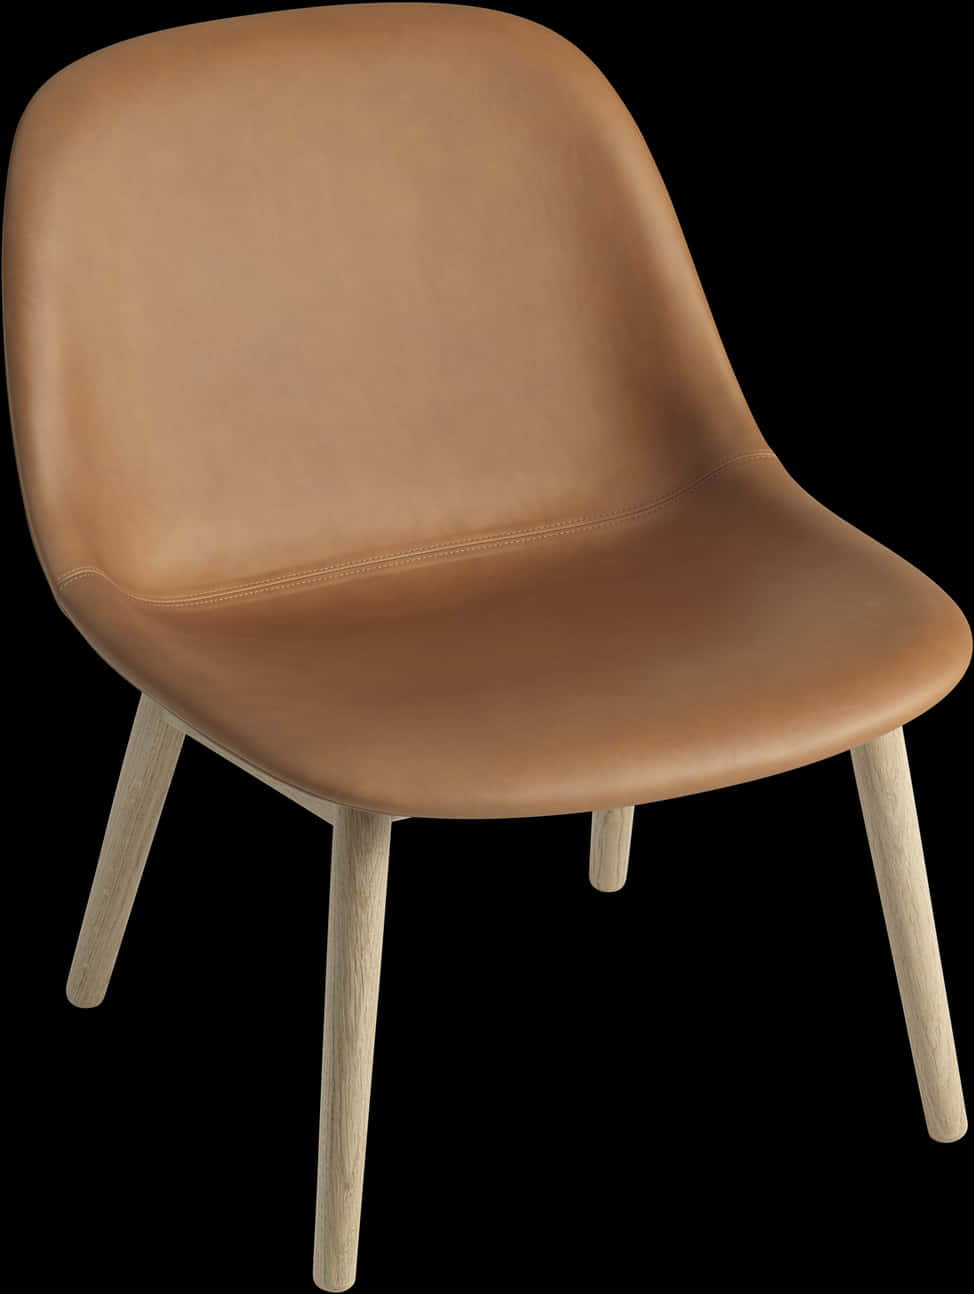 Modern Tan Leather Chair PNG